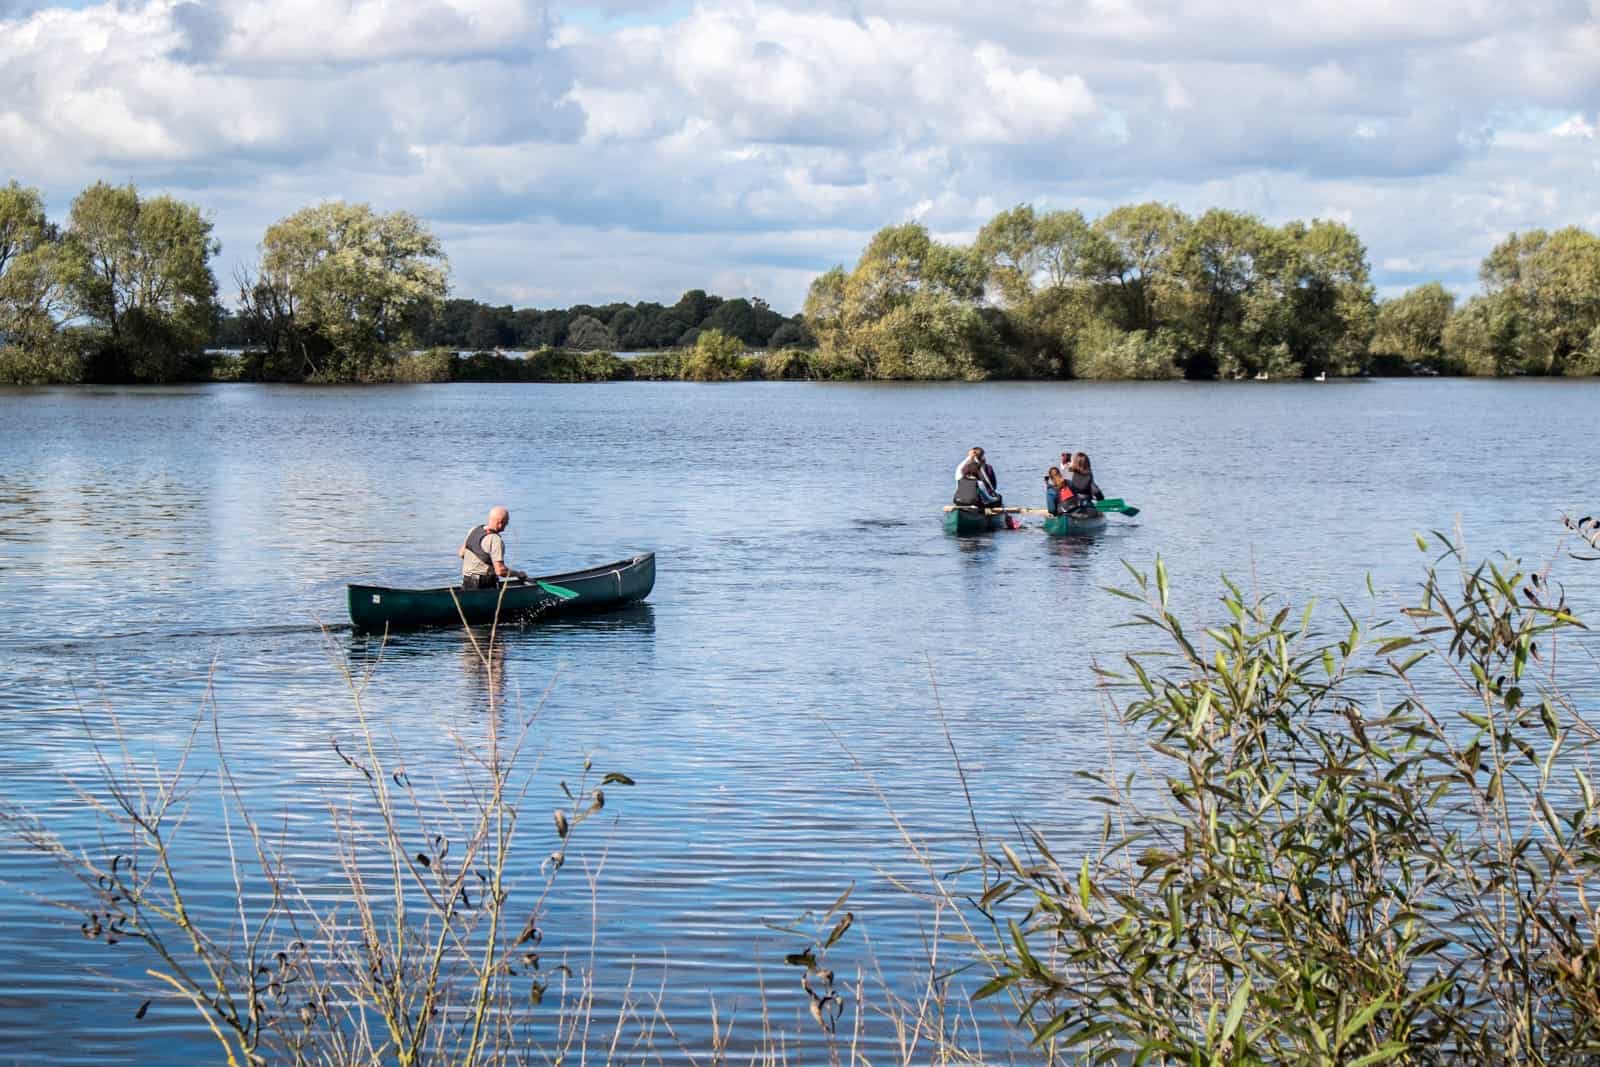 Canoeing on Lough Neagh in Northern Ireland